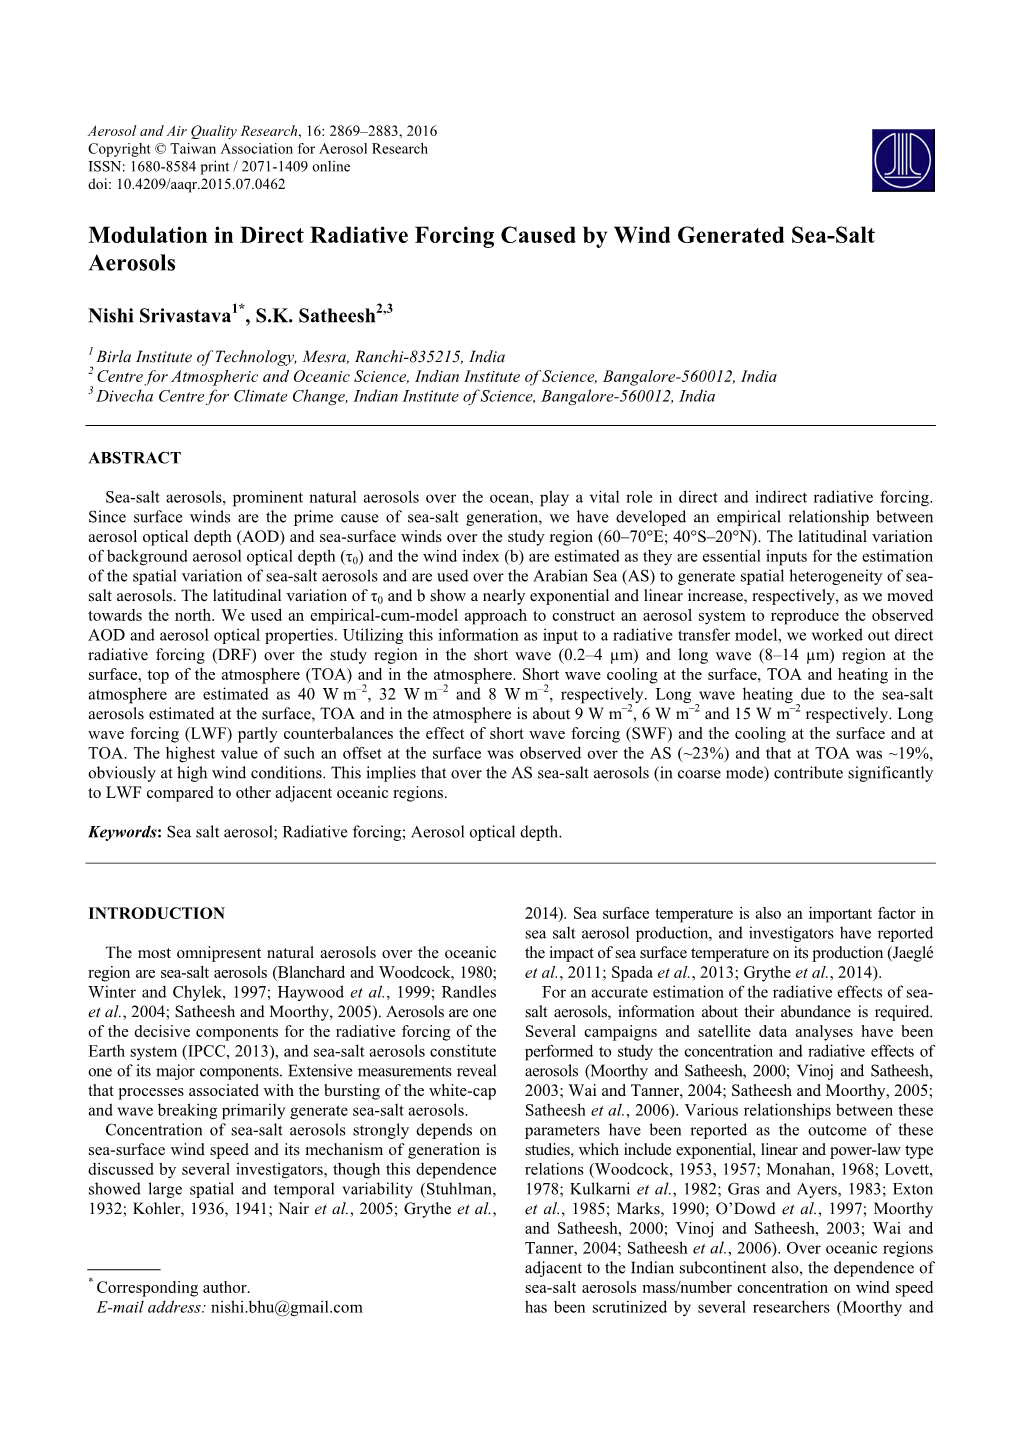 Modulation in Direct Radiative Forcing Caused by Wind Generated Sea-Salt Aerosols